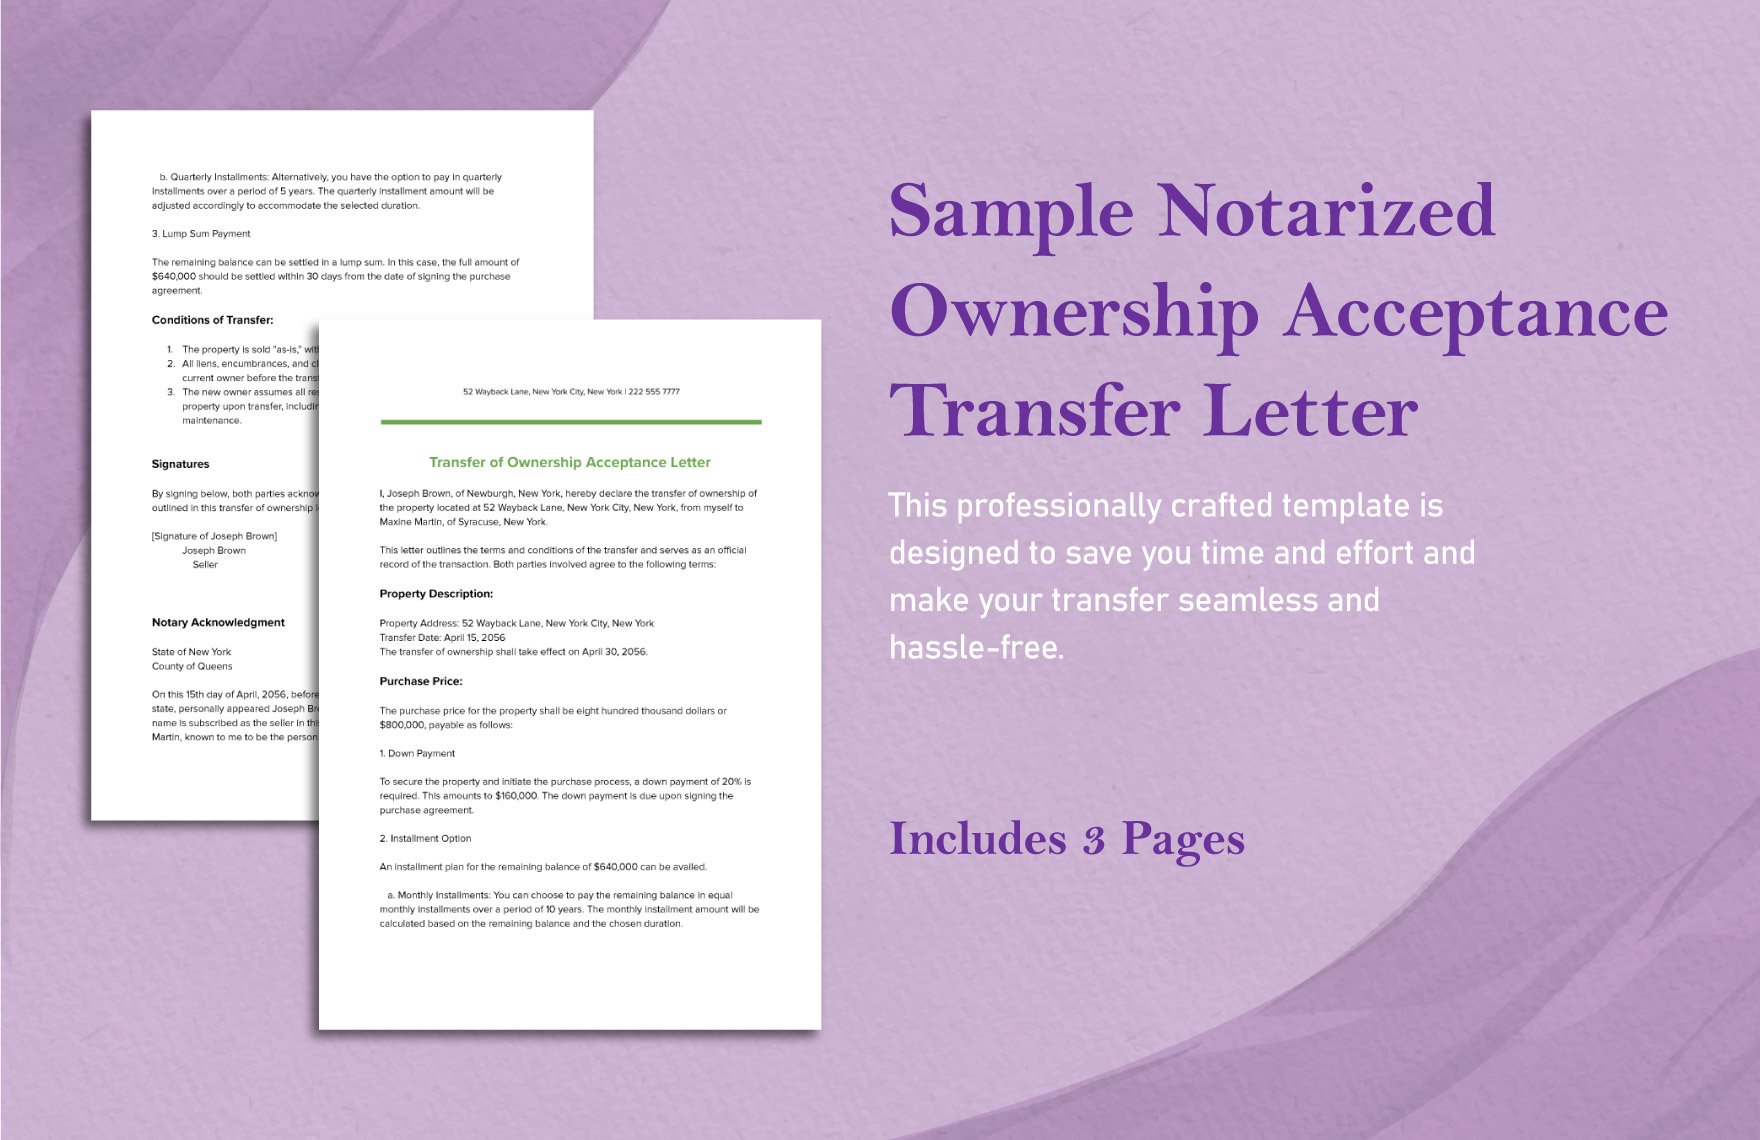 Sample Notarized Ownership Acceptance Transfer Letter